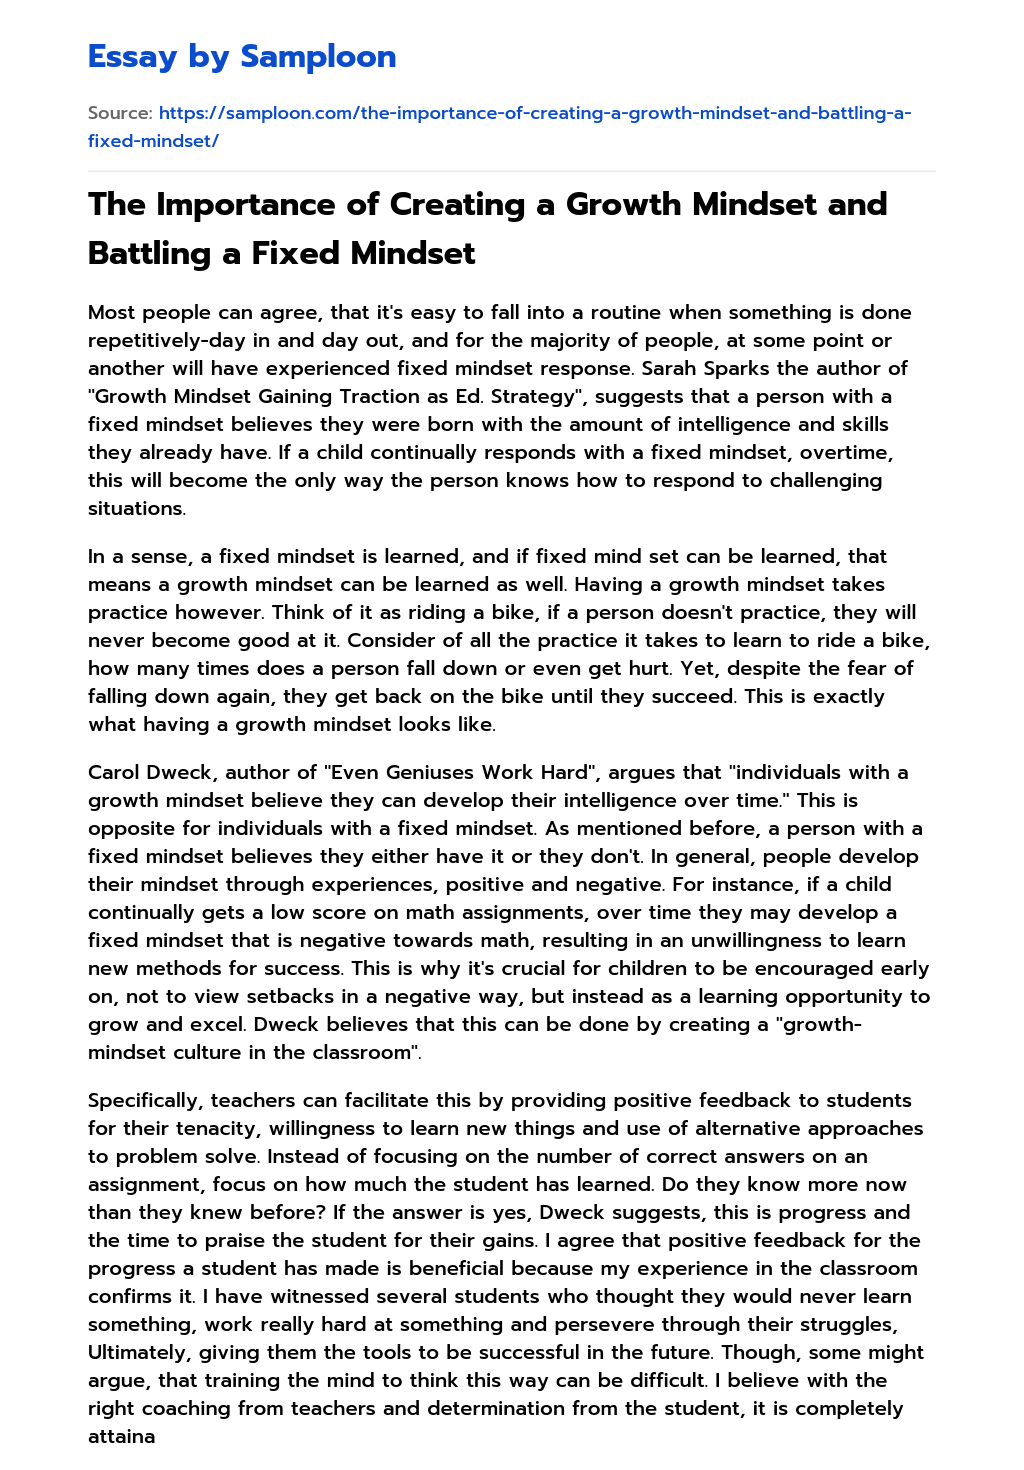 The Importance of Creating a Growth Mindset and Battling a Fixed Mindset essay